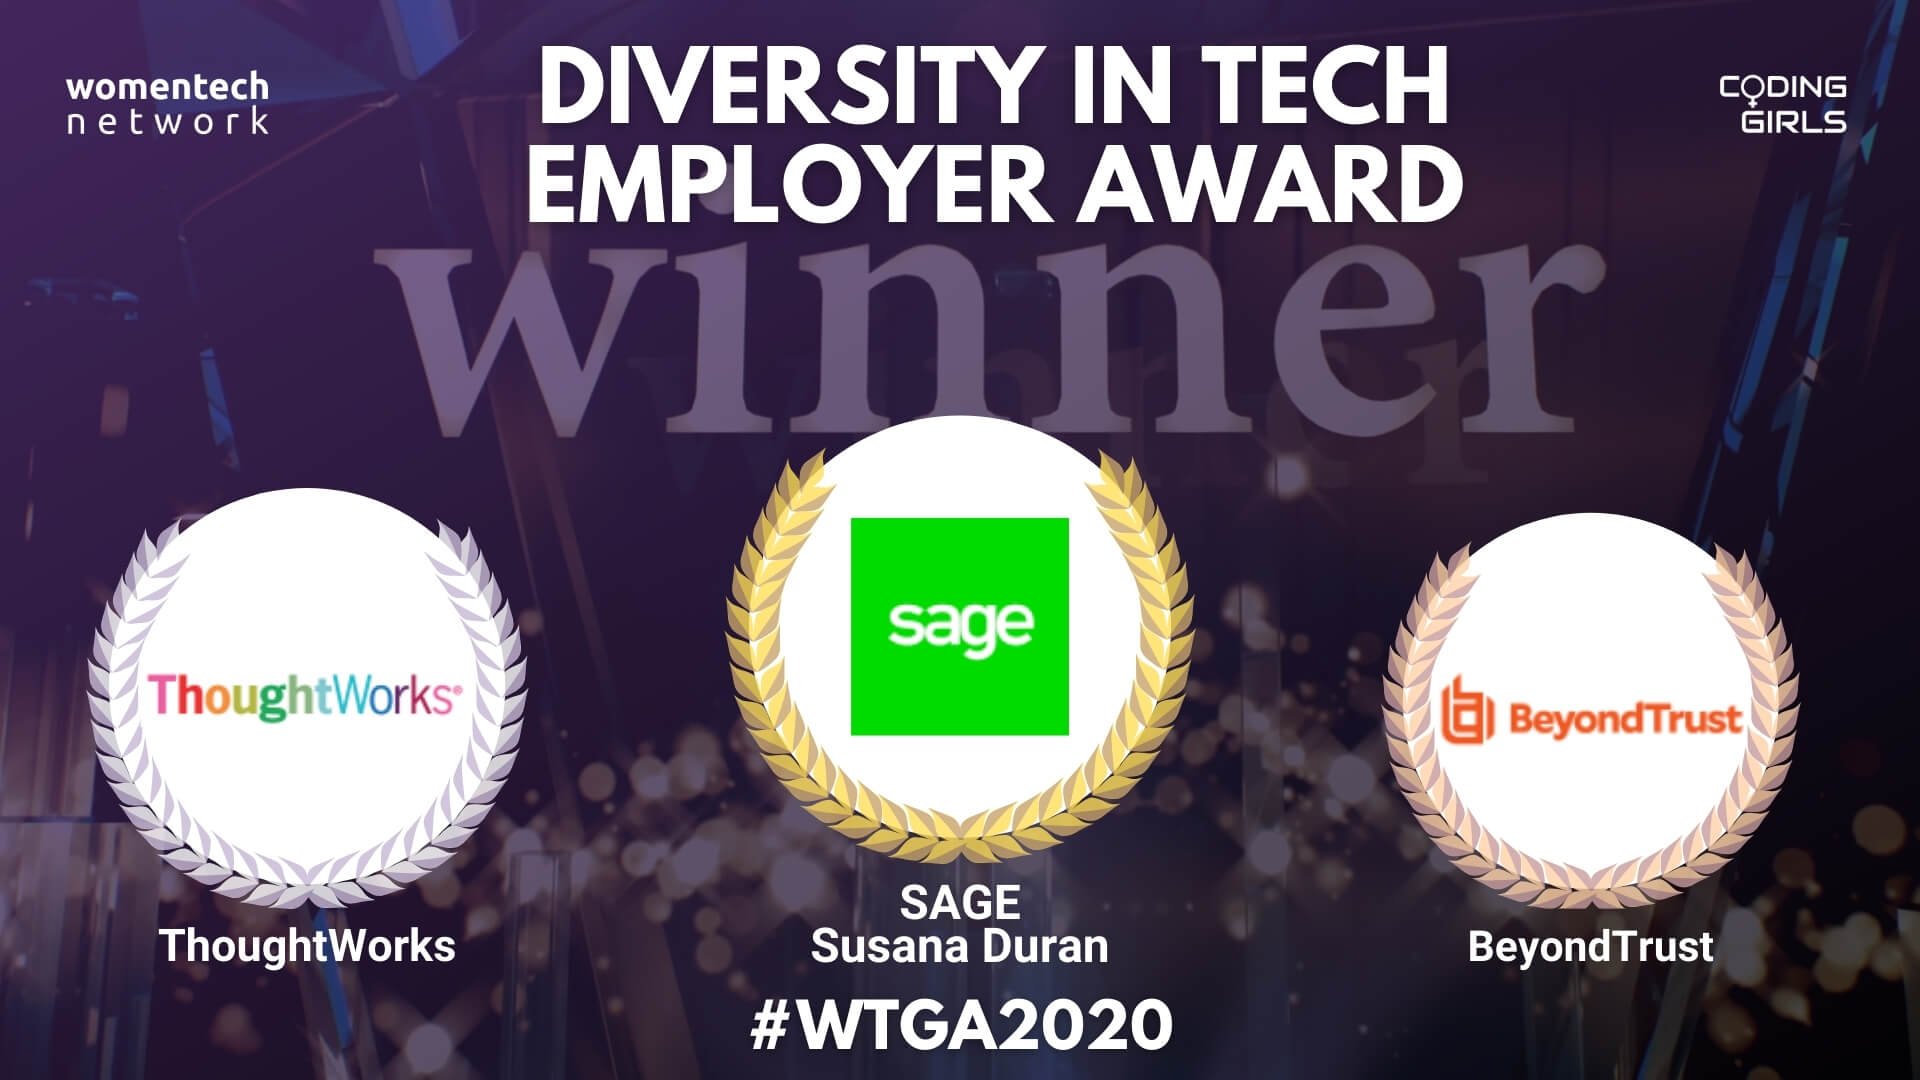 Diversity in Tech of the Year Award